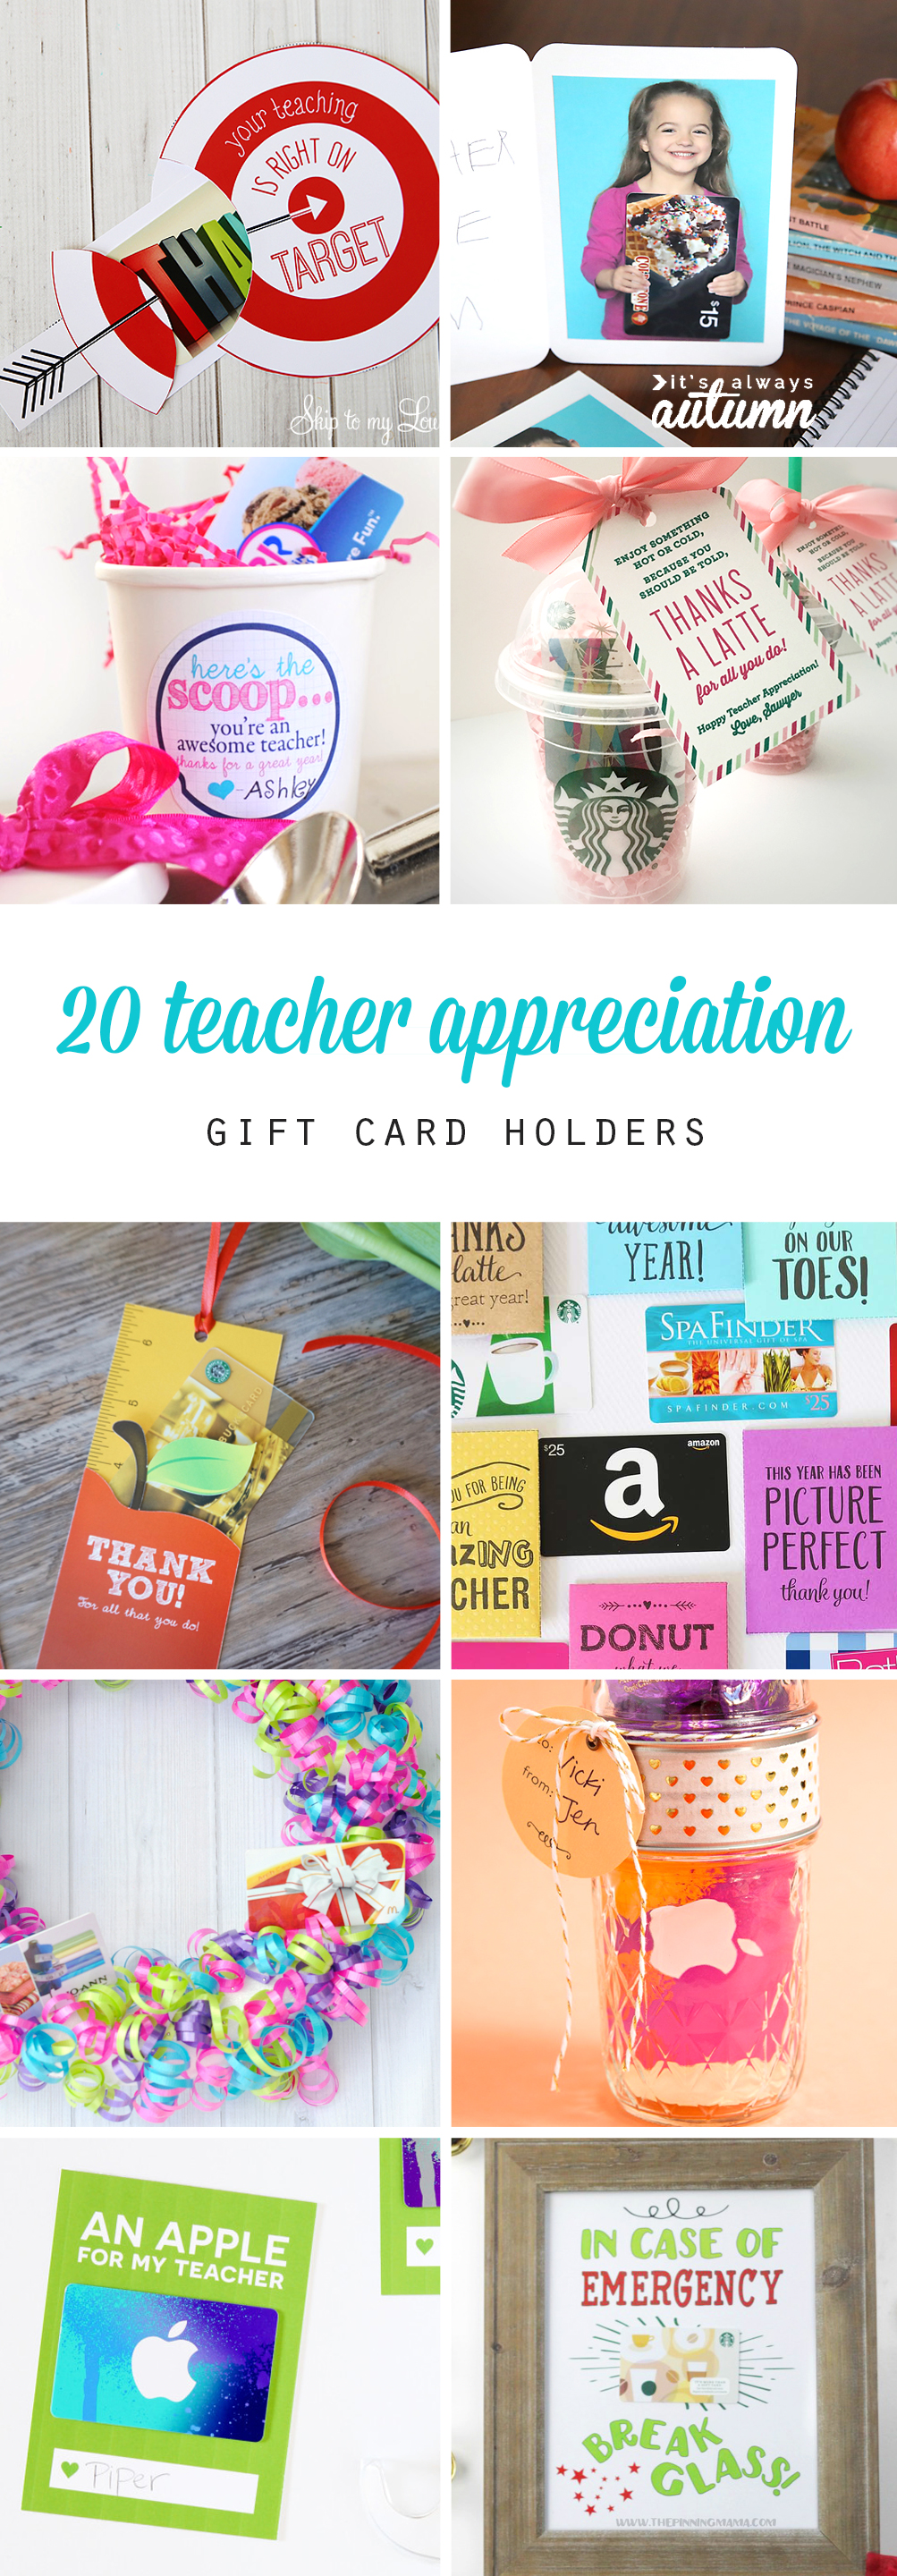 fun-ways-to-give-gift-cards-for-teacher-appreciation-it-s-always-autumn